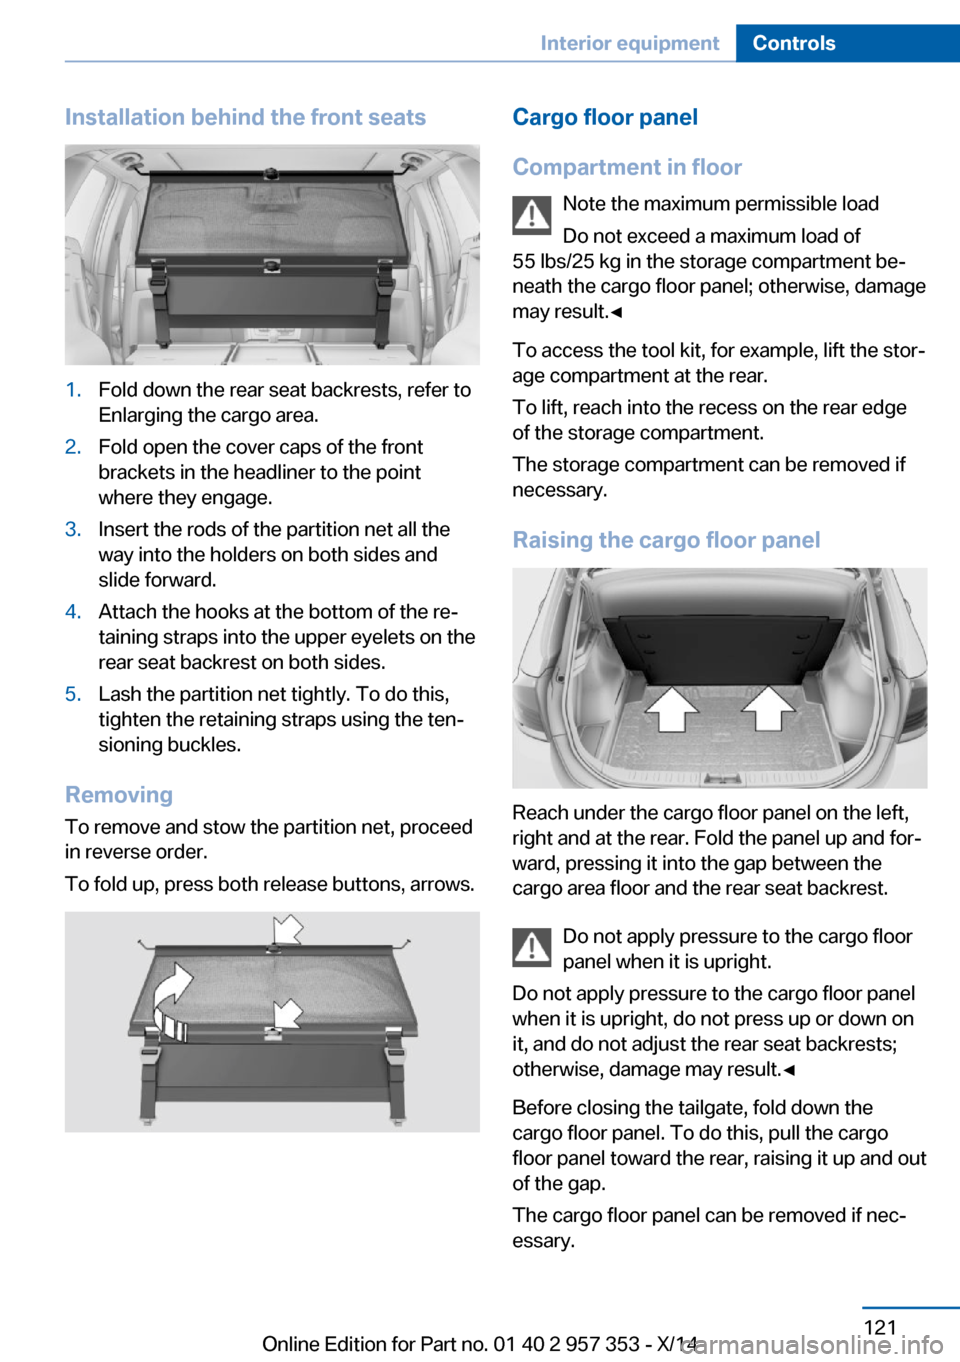 BMW X1 2014 E84 Owners Manual Installation behind the front seats1.Fold down the rear seat backrests, refer to
Enlarging the cargo area.2.Fold open the cover caps of the front
brackets in the headliner to the point
where they enga